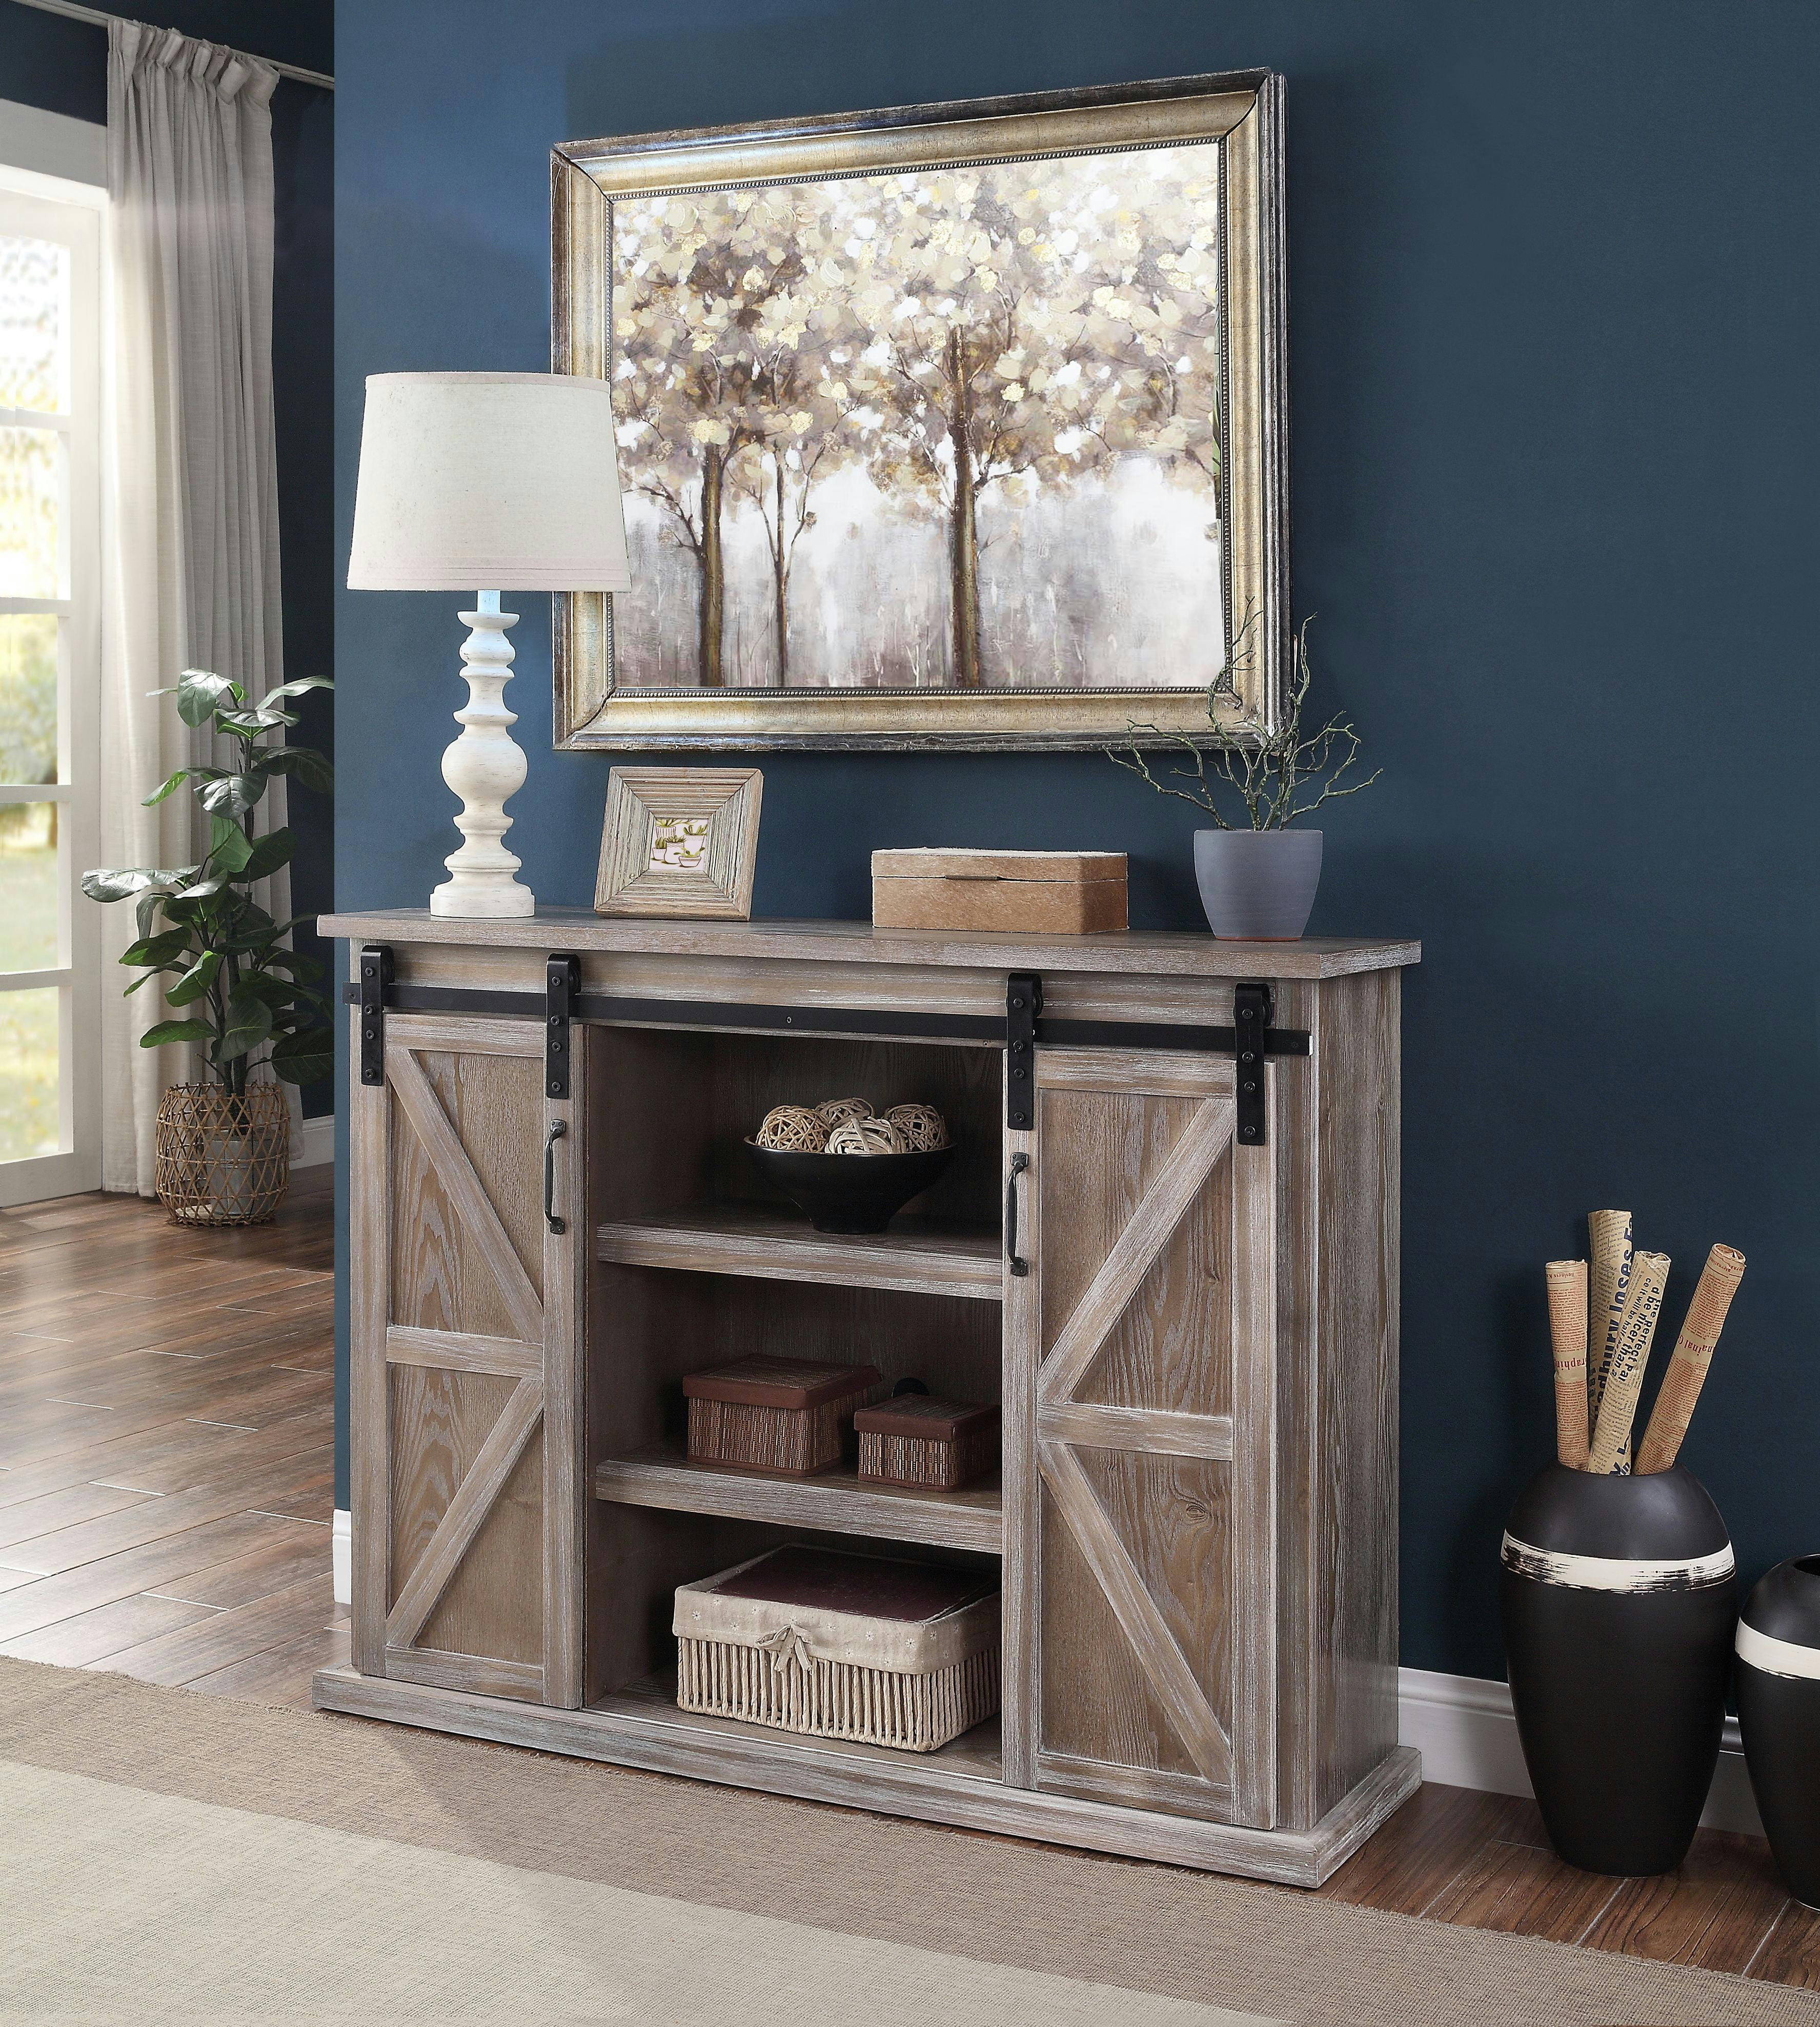 Orabella 51.5" Rustic Natural Wooden TV Stand with Sliding Barn Doors